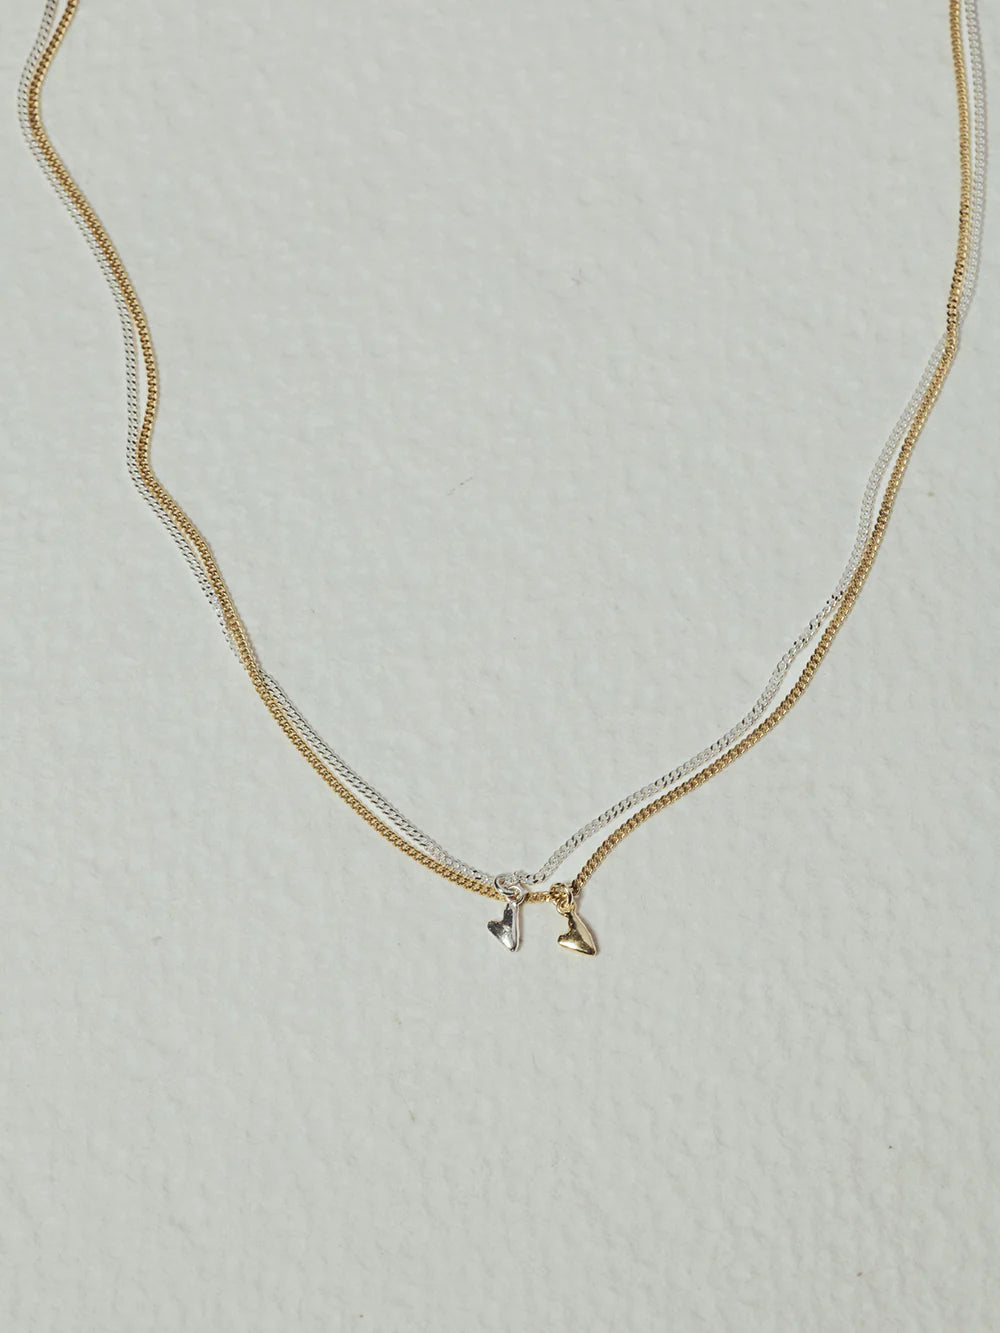 YOU (SMALL HEART) Necklace goldplated